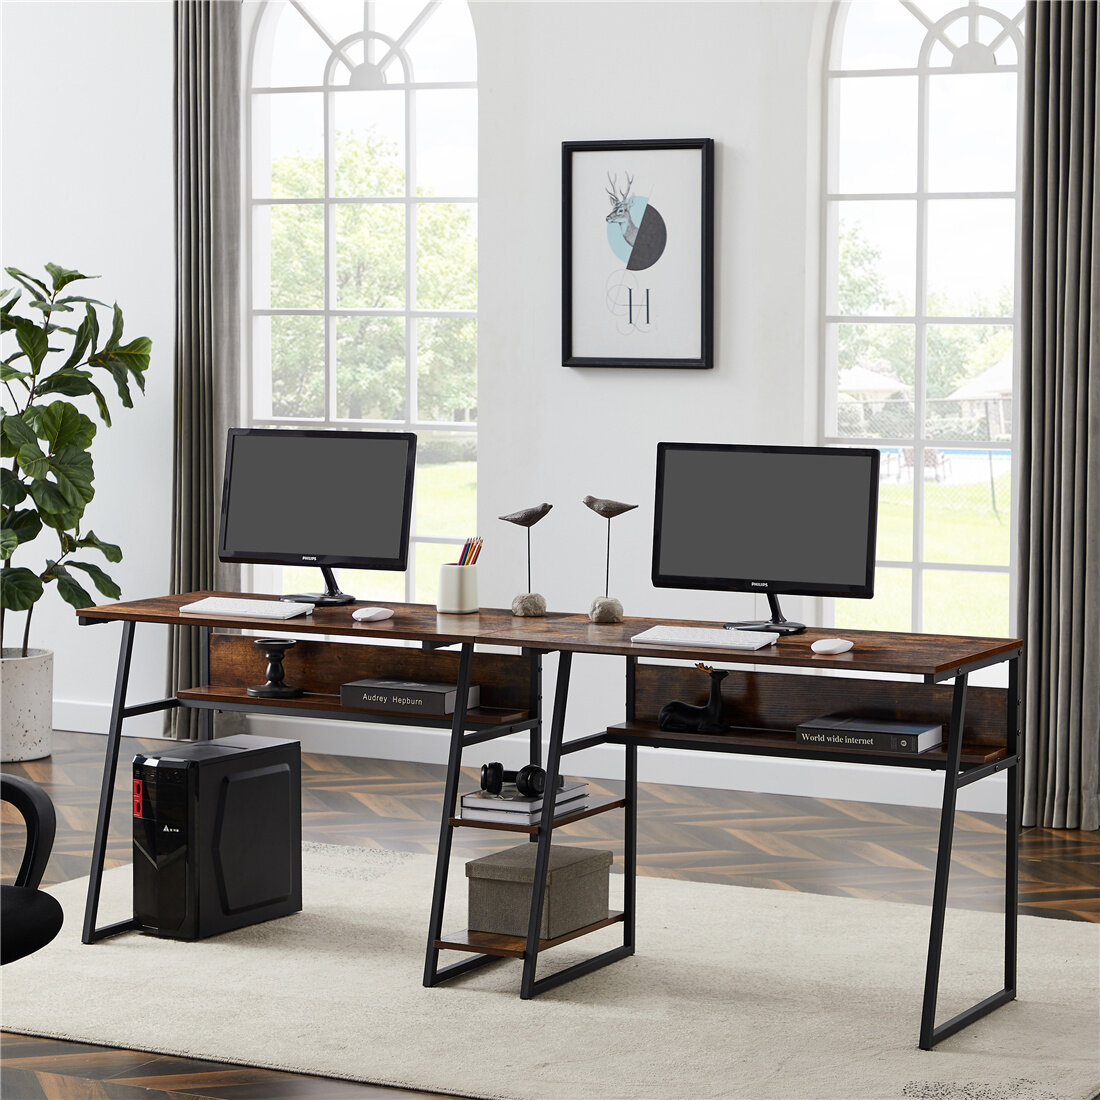 Details about   Computer Table PC Laptop Desk Workstation Home Office Study Gaming Writing Desk 